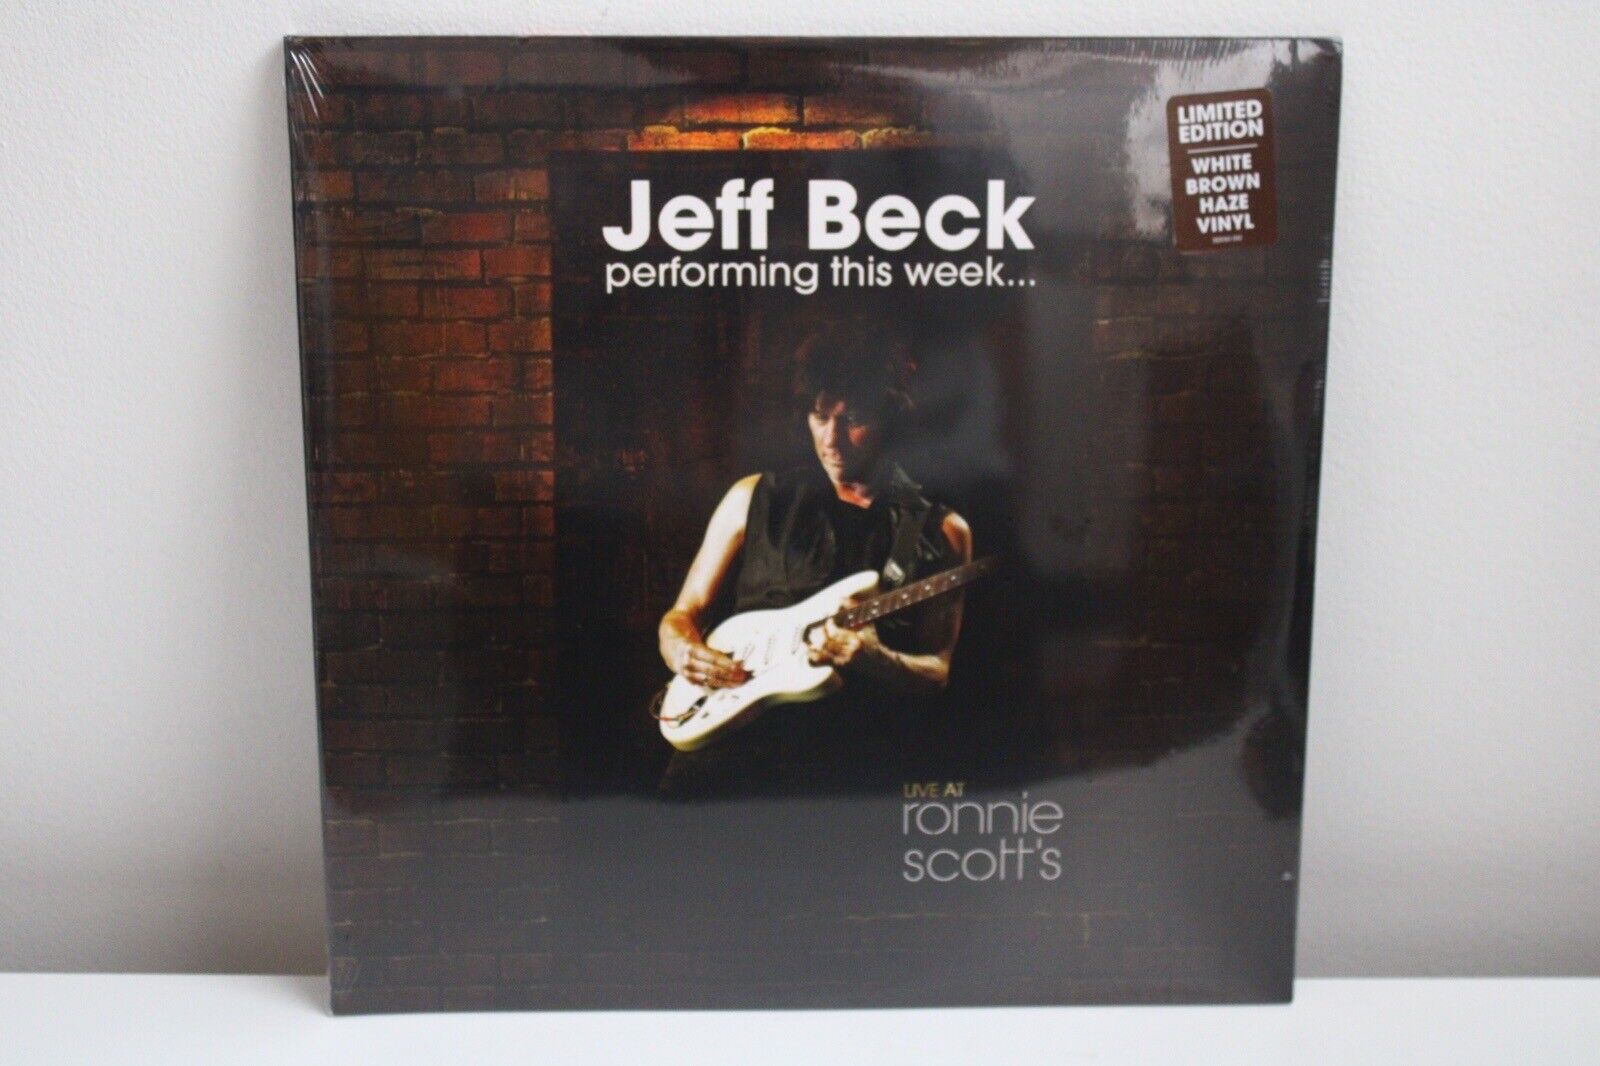 Jeff Beck SEALED Live at Ronnie Scotts 2 x LP LIMITED WHITE BROWN HAZE VINYL OOP